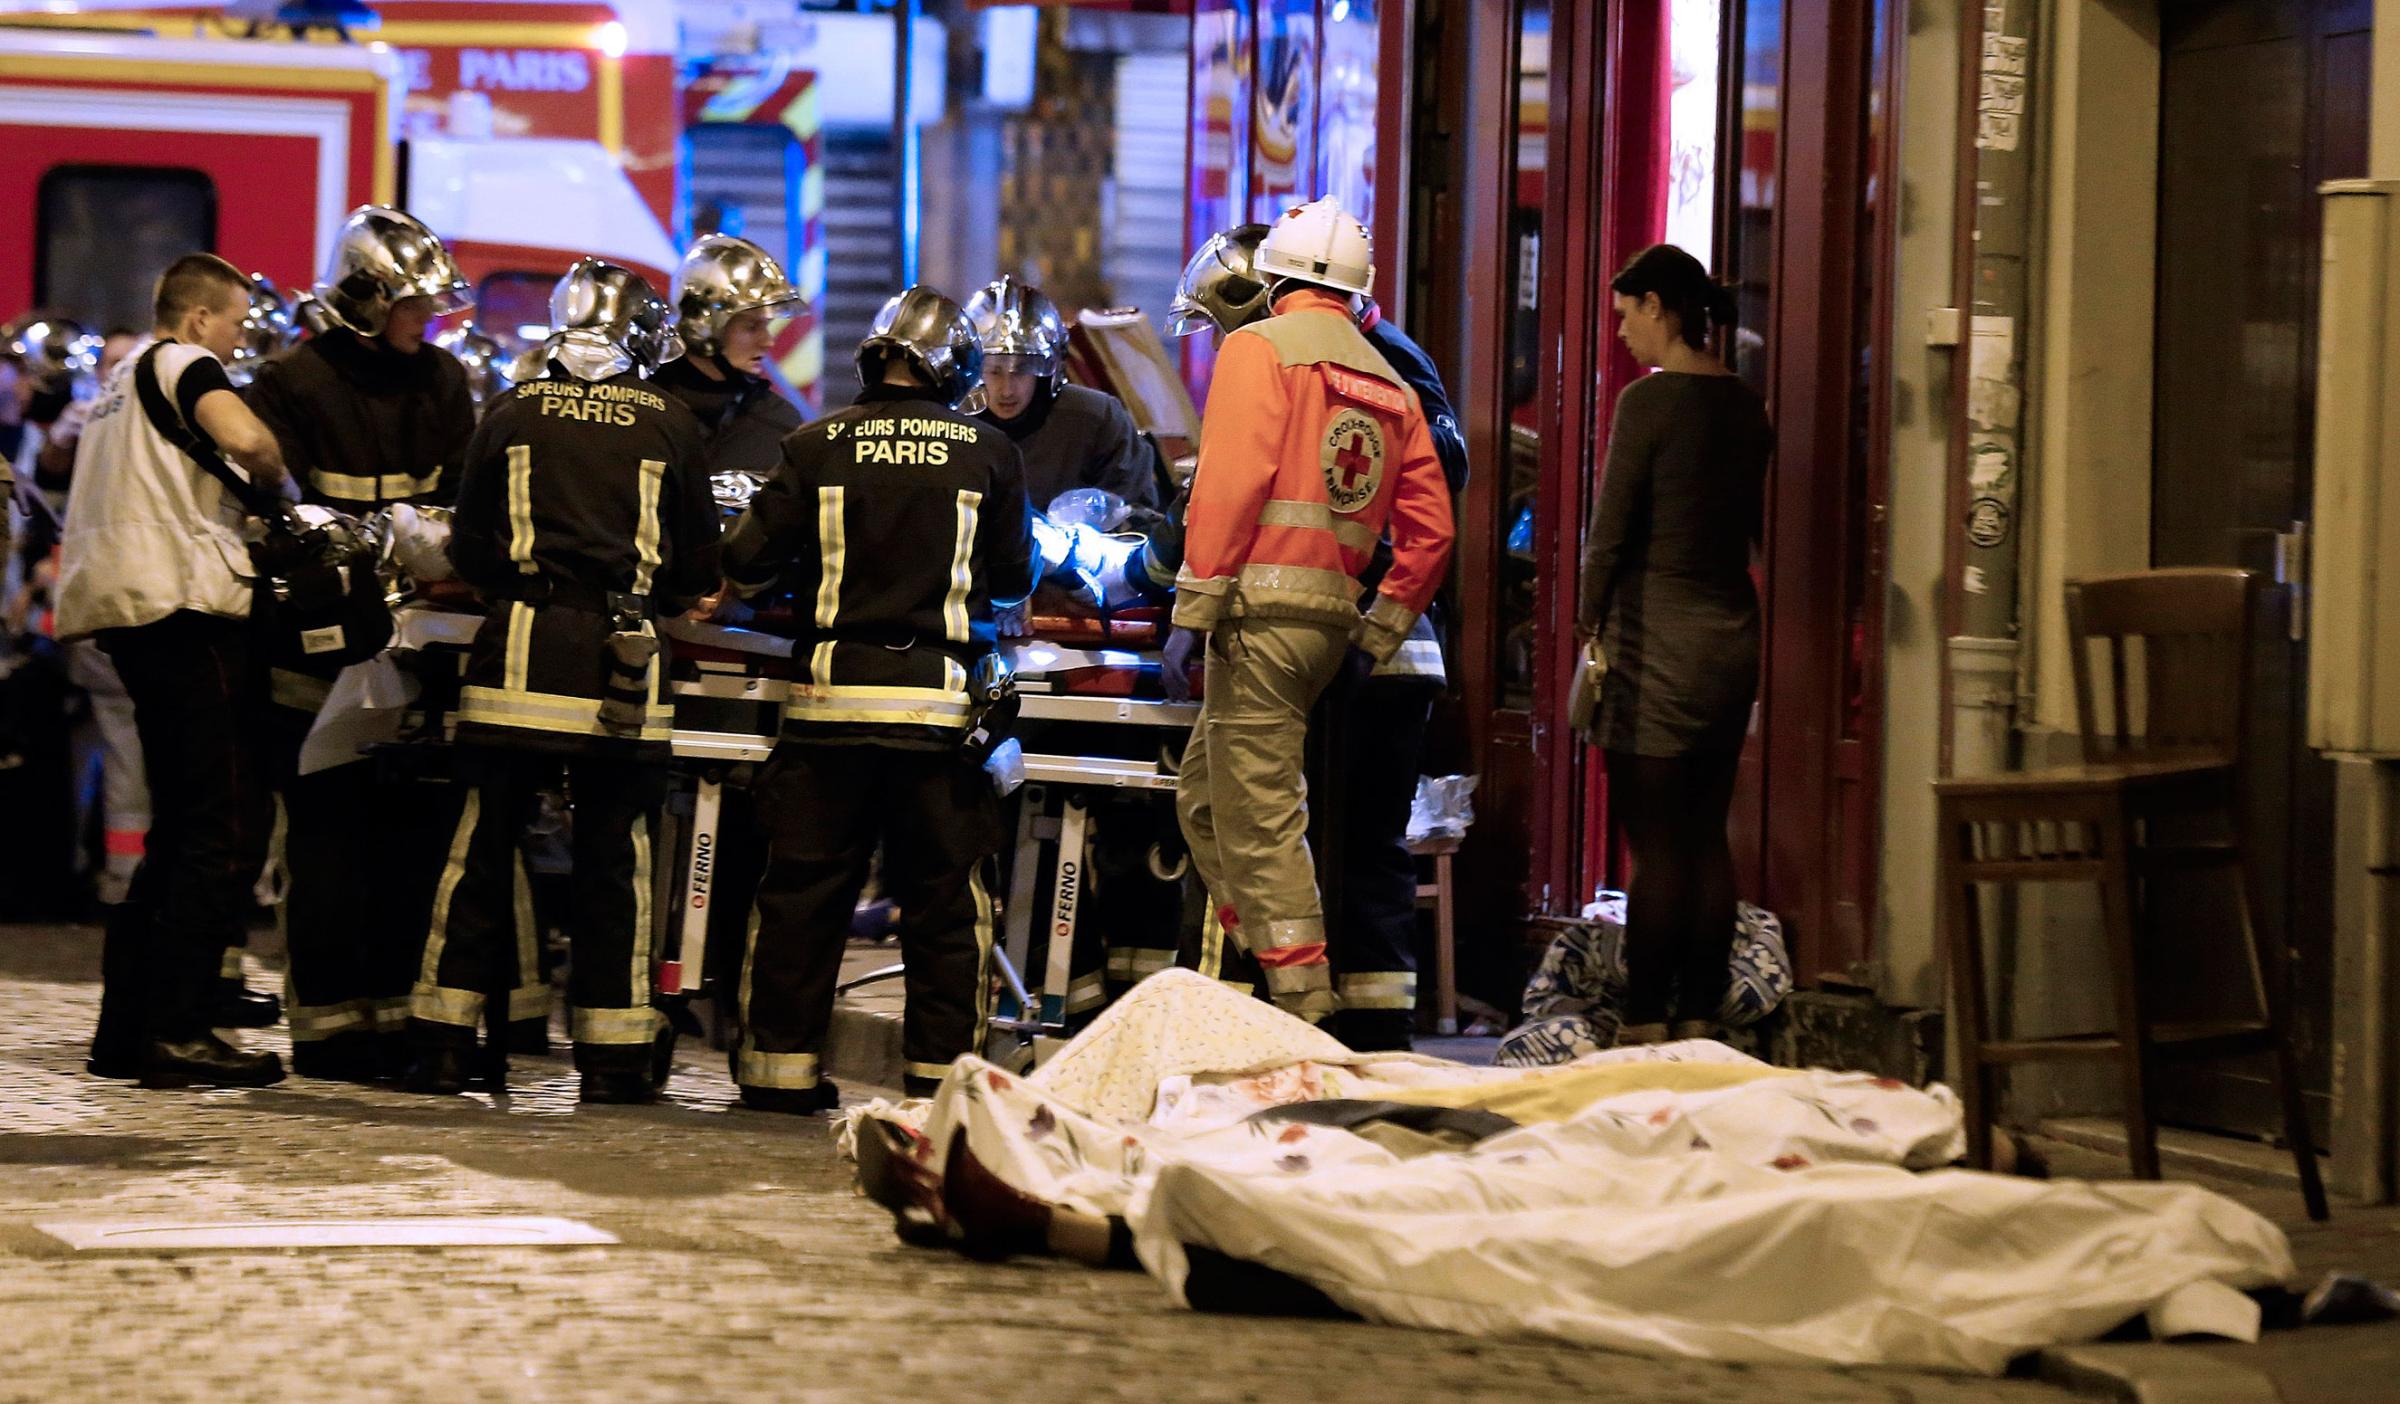 Rescue workers attend to victims of the attacks in the 10th district of Paris on Nov. 13, 2015.